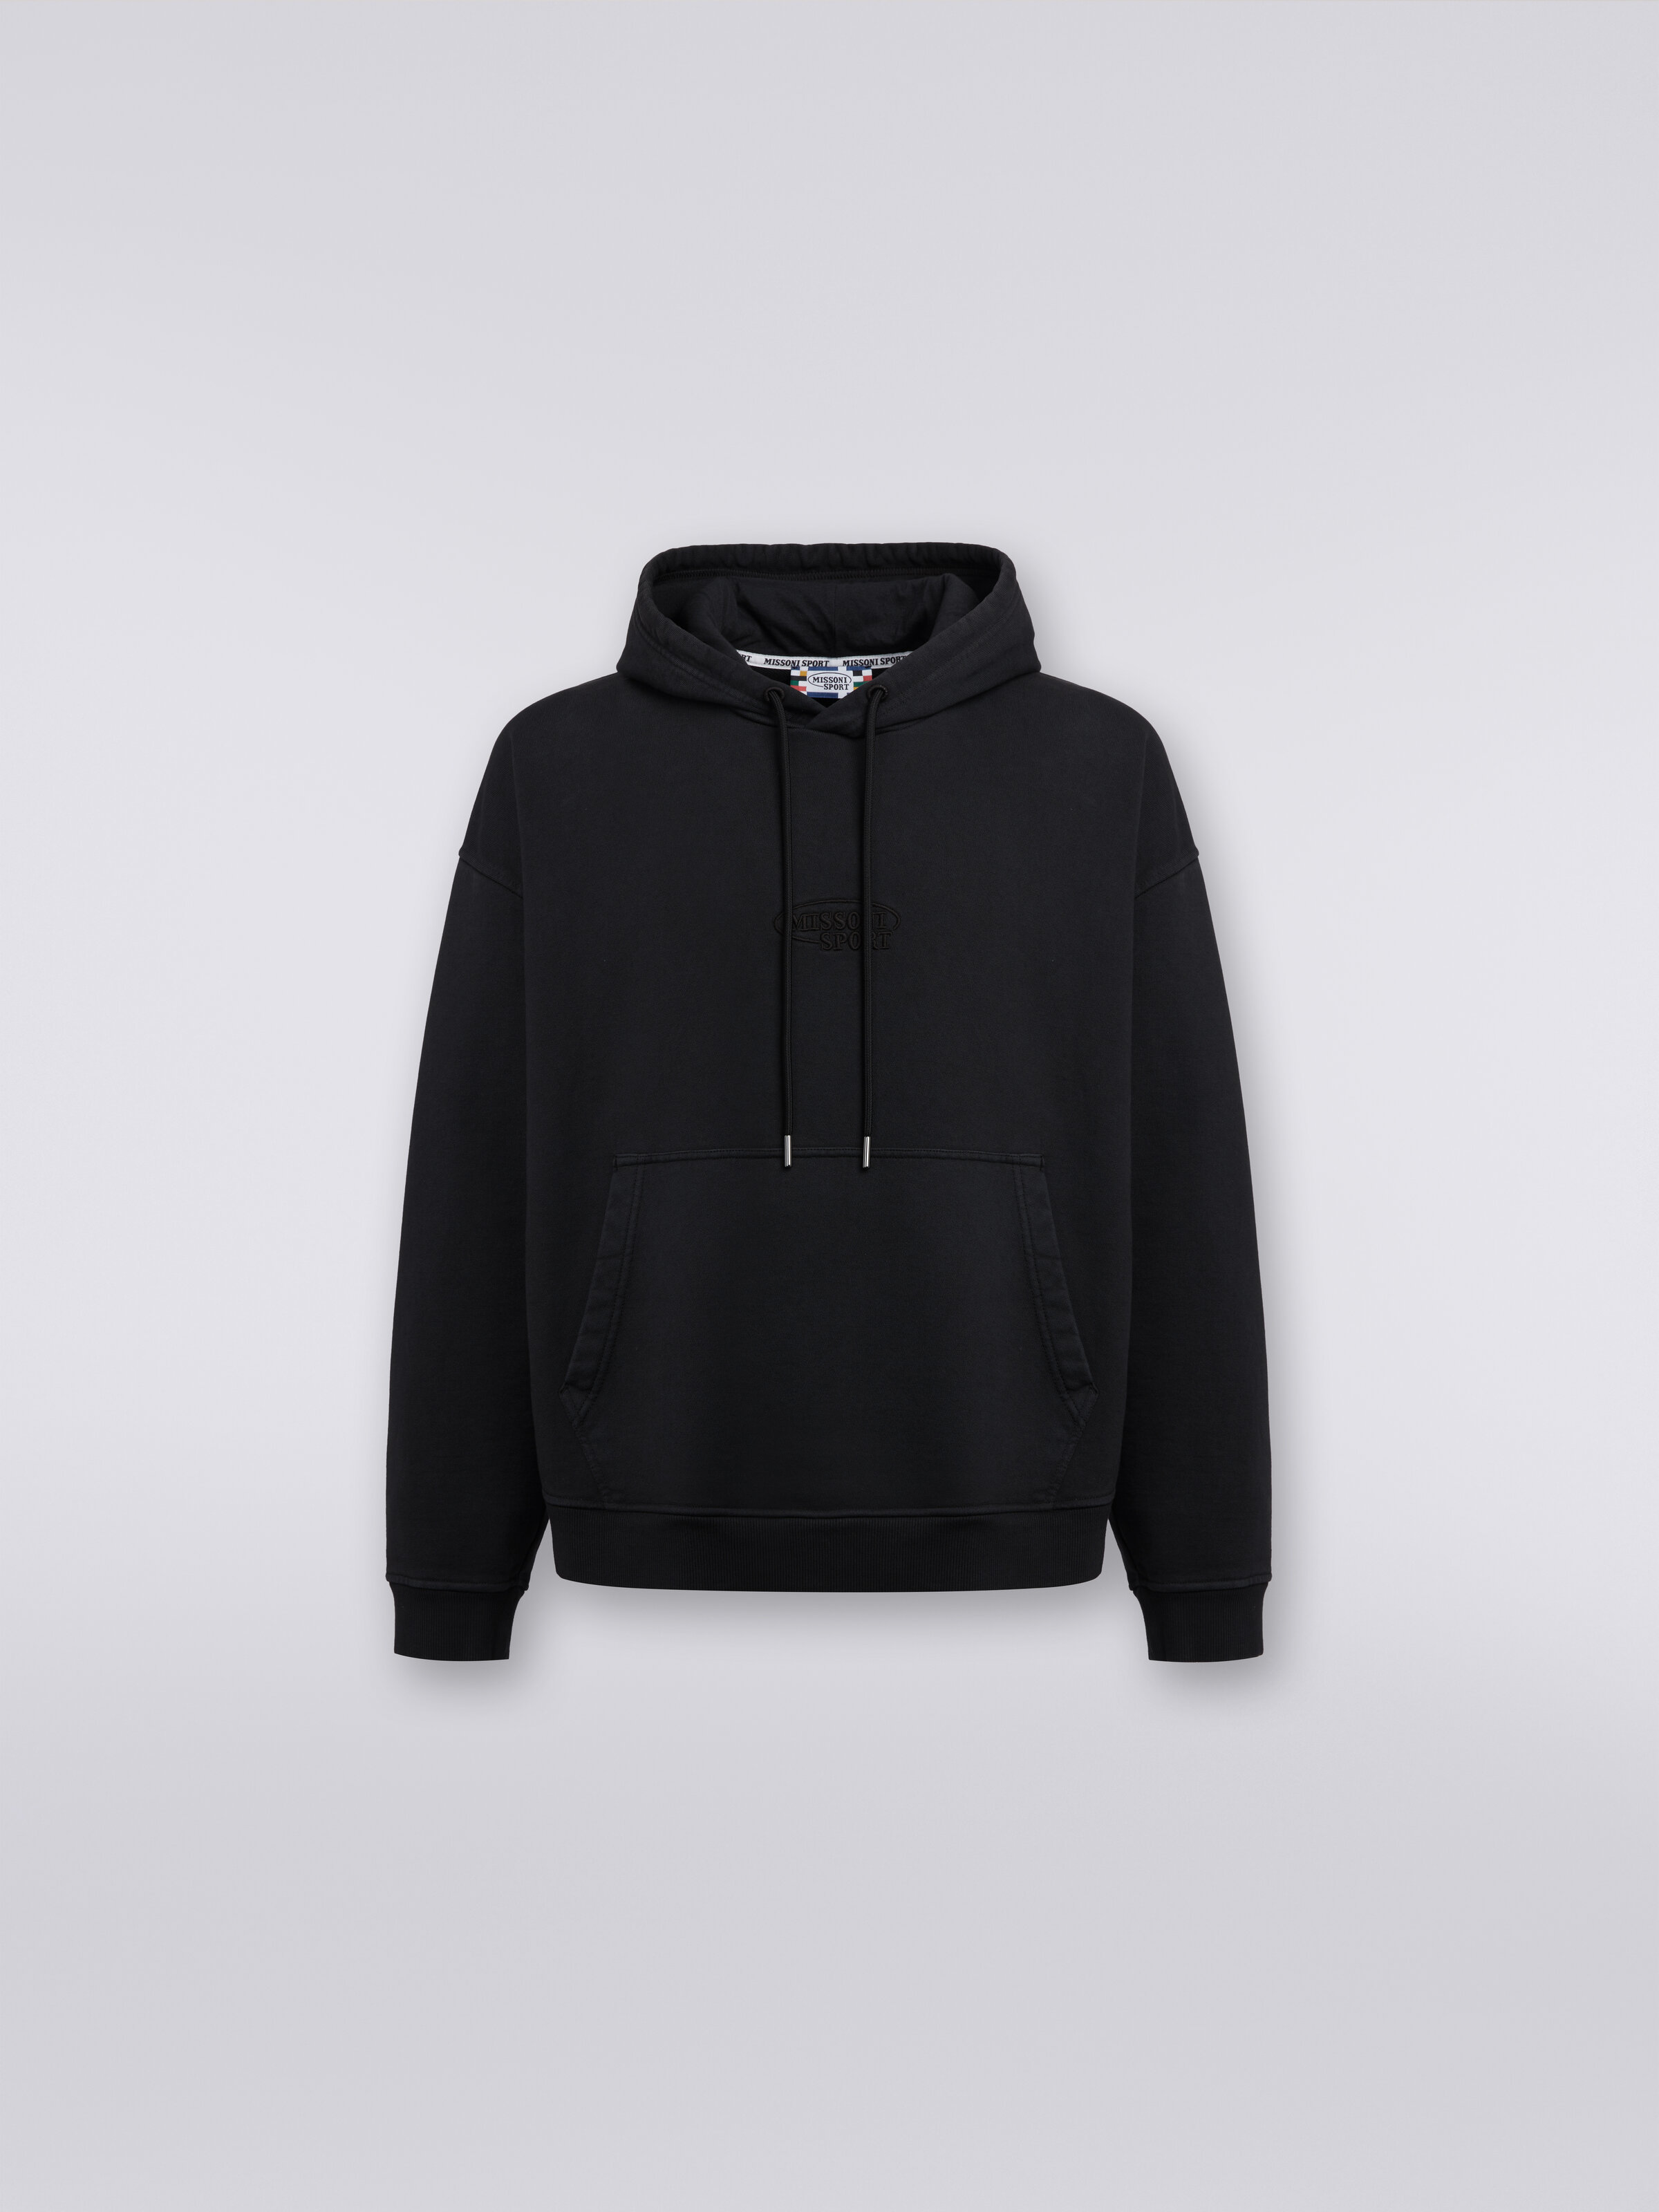 Hooded sweatshirt in cotton with logo, Black    - 0